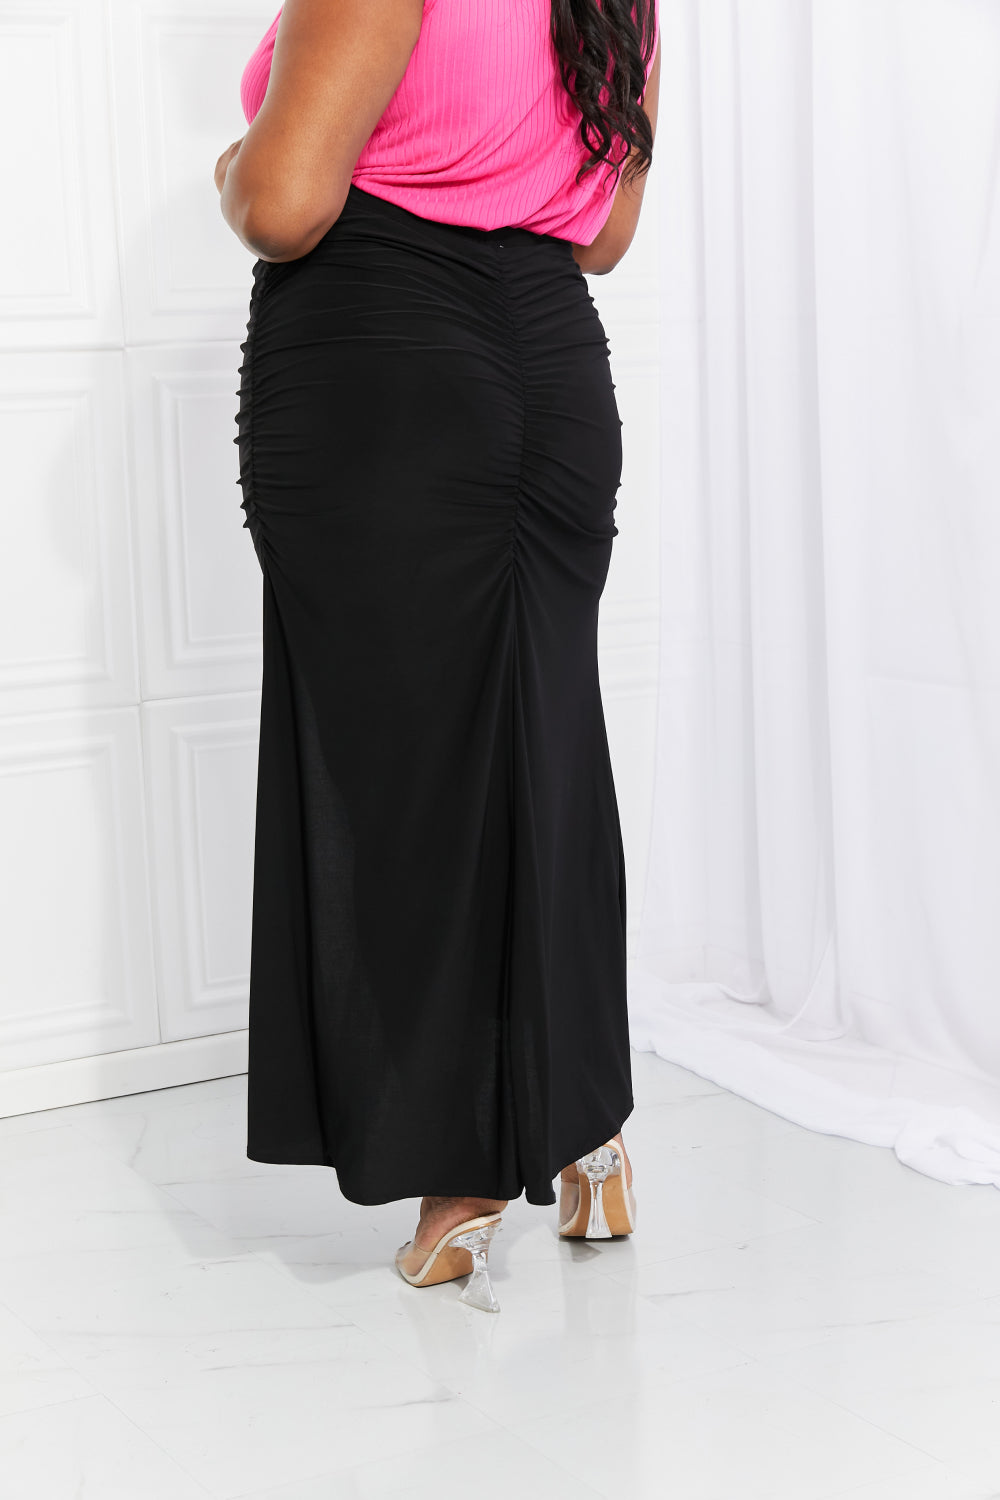 White Birch Full Size Up and Up Ruched Slit Maxi Skirt in Black - Cheeky Chic Boutique